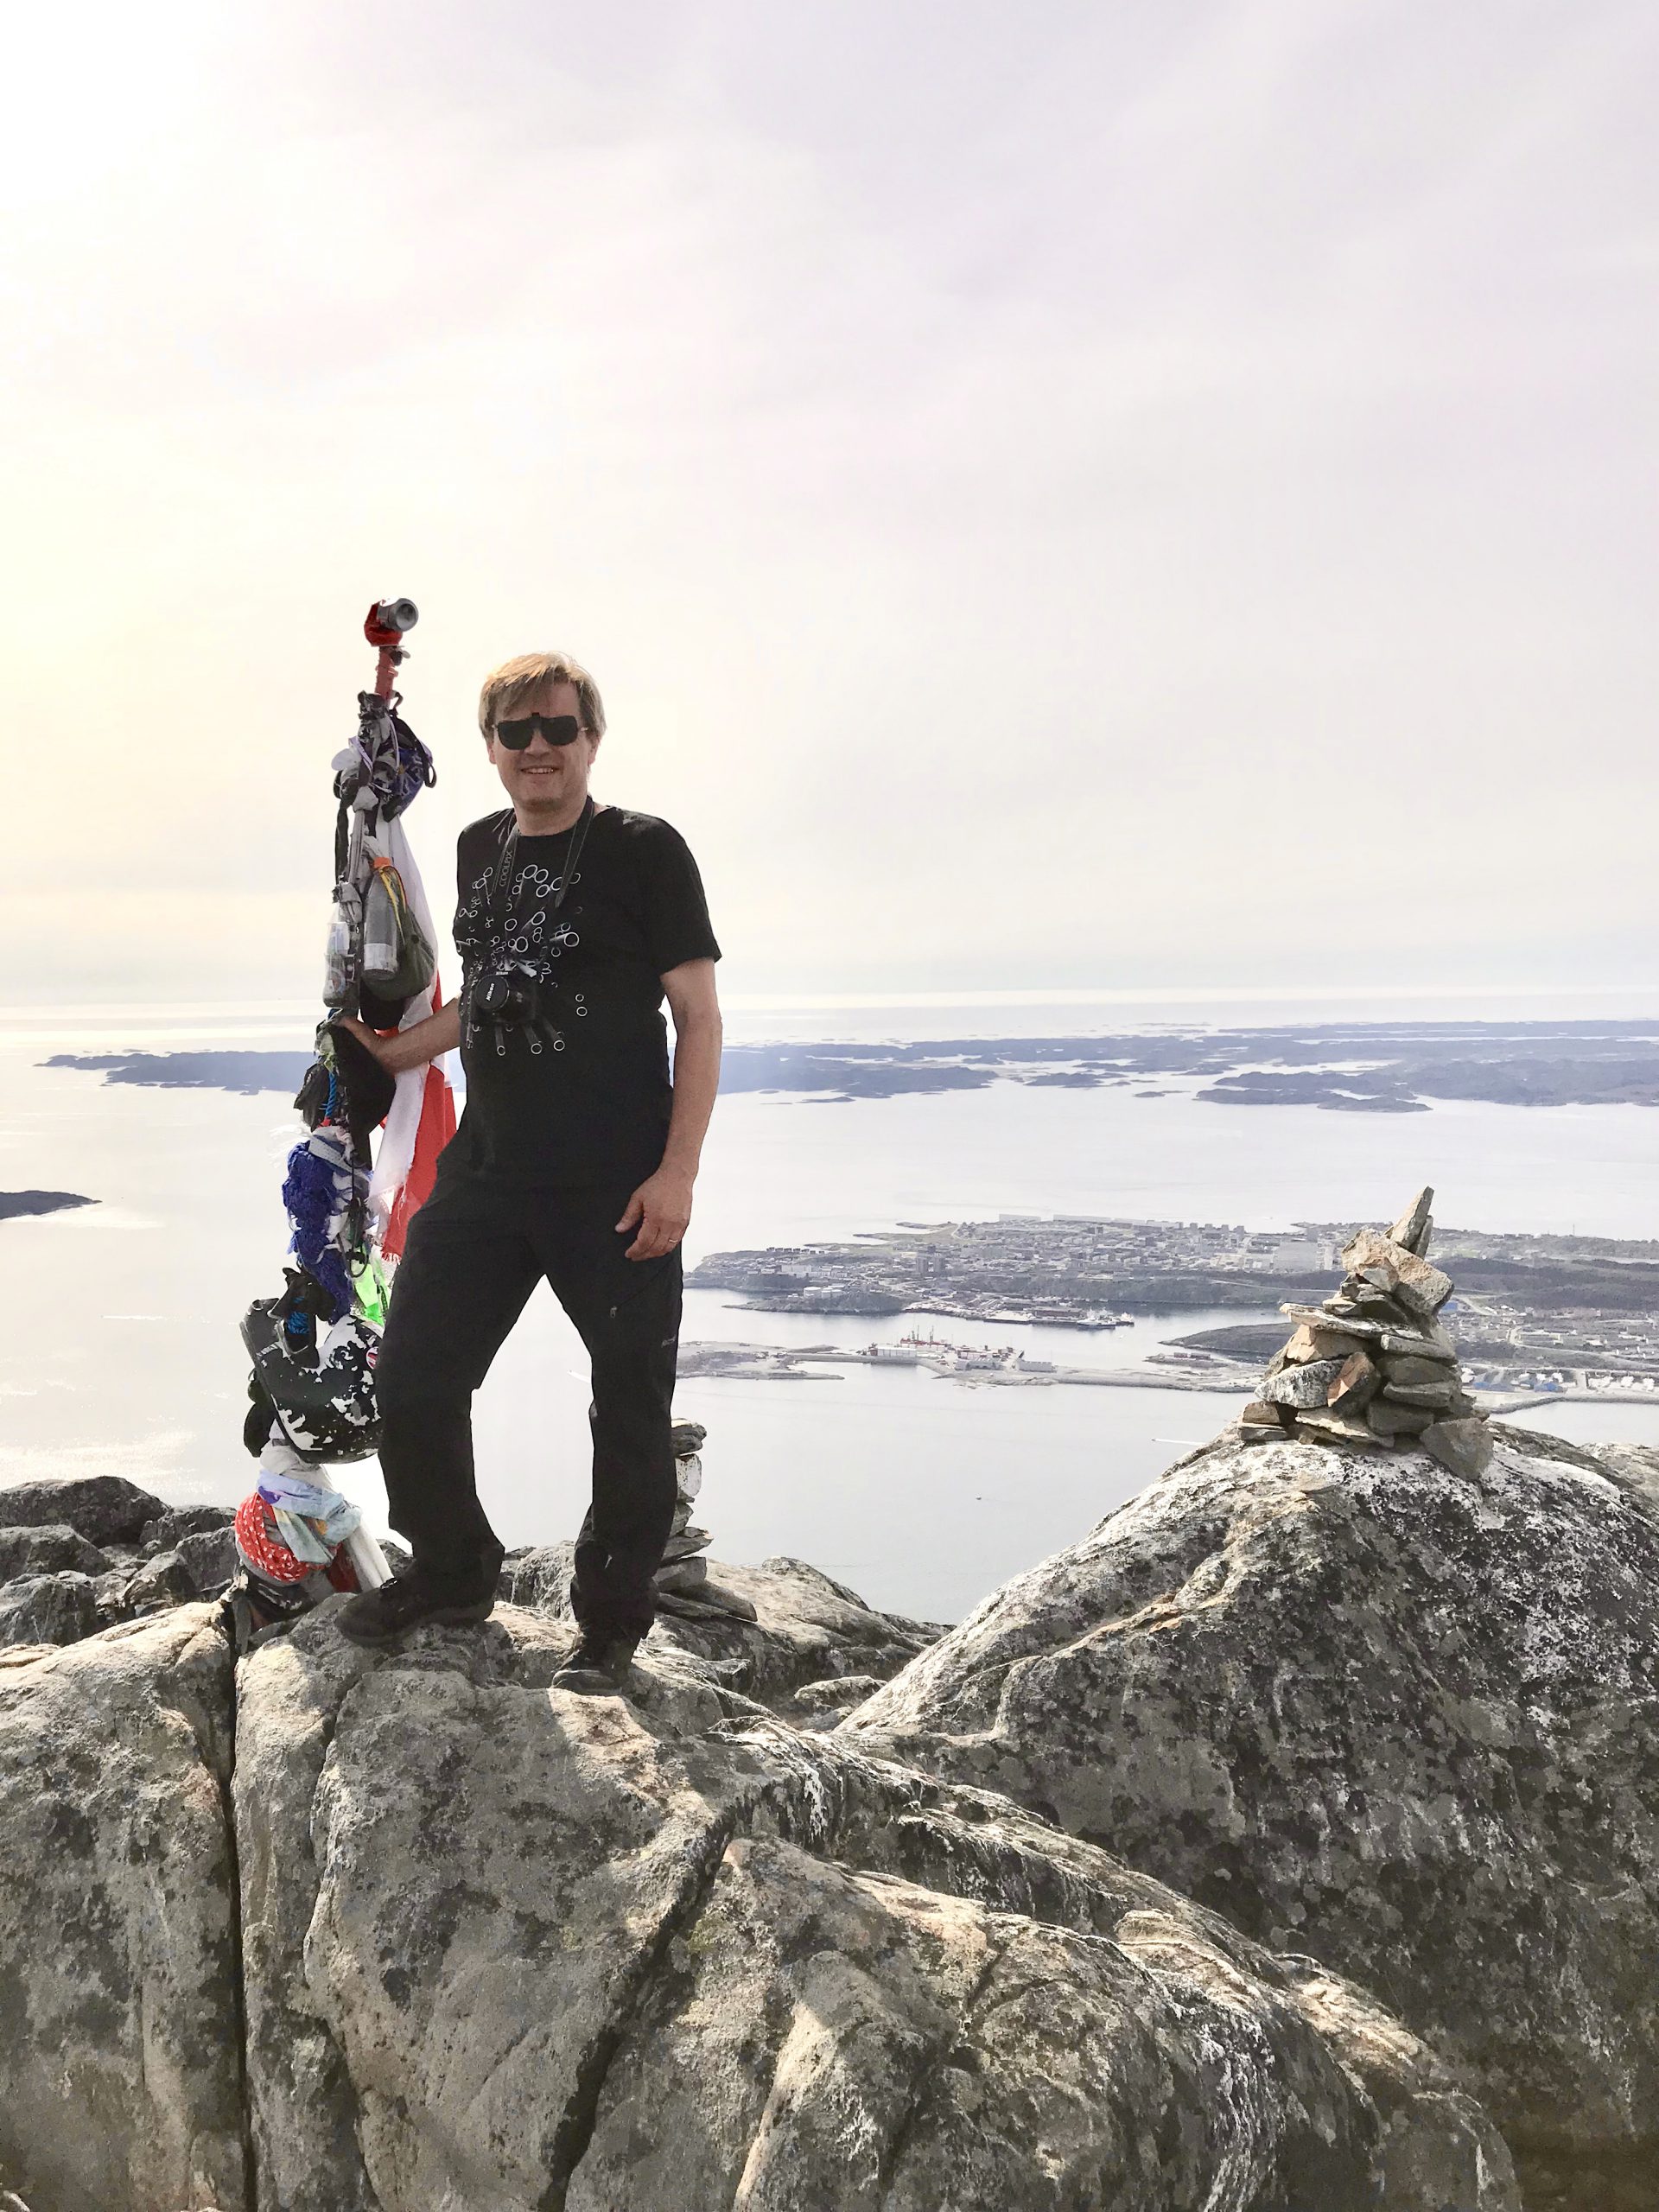 Image of Søren standing on mountain top holding pole